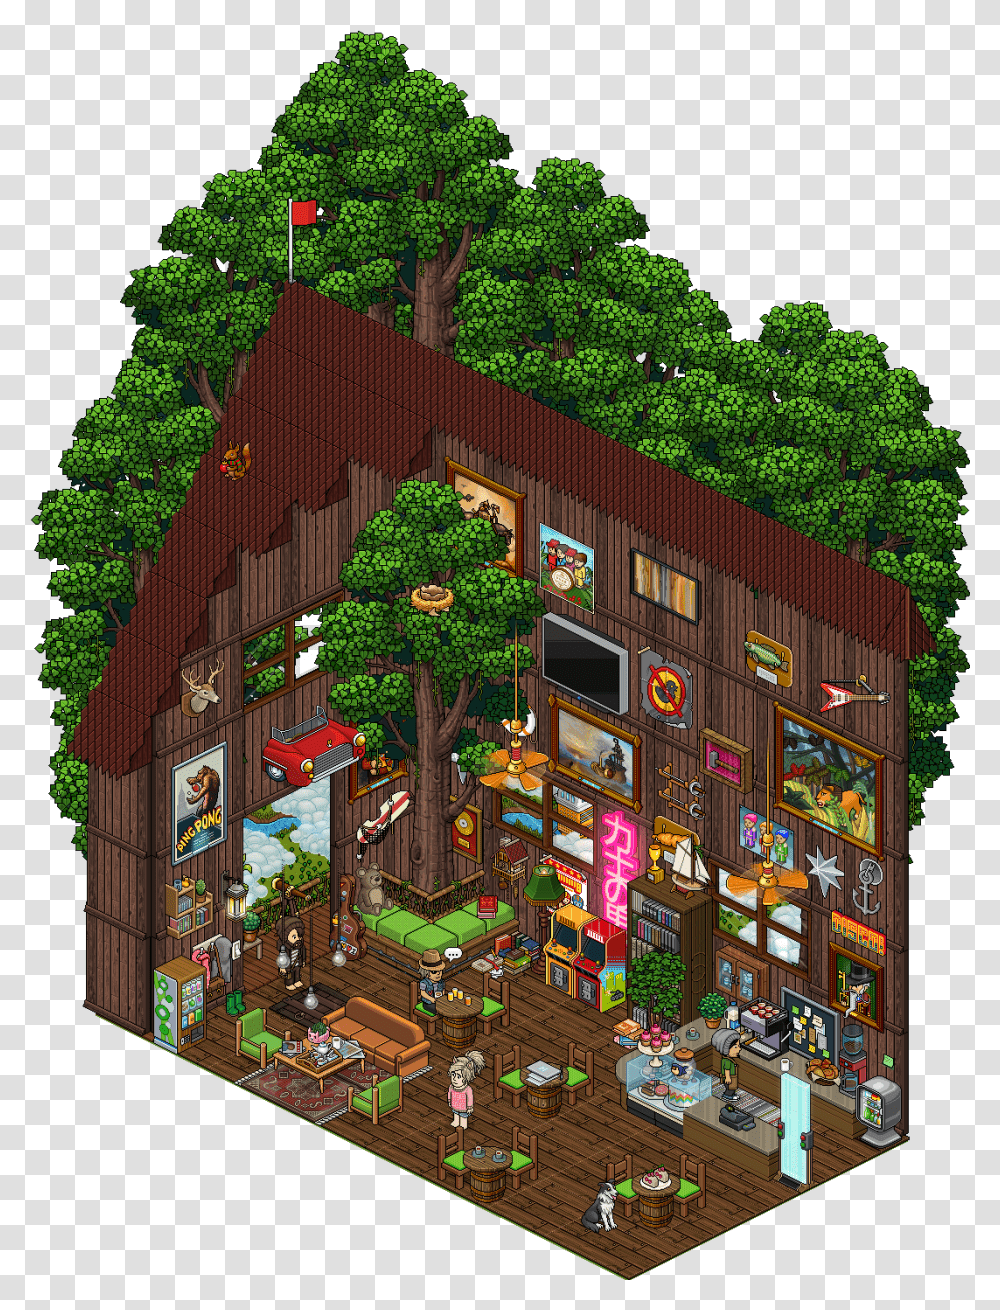 Download Habbo Hotel Tree House Full Size Image Pngkit Tree, Neighborhood, Urban, Building, Person Transparent Png